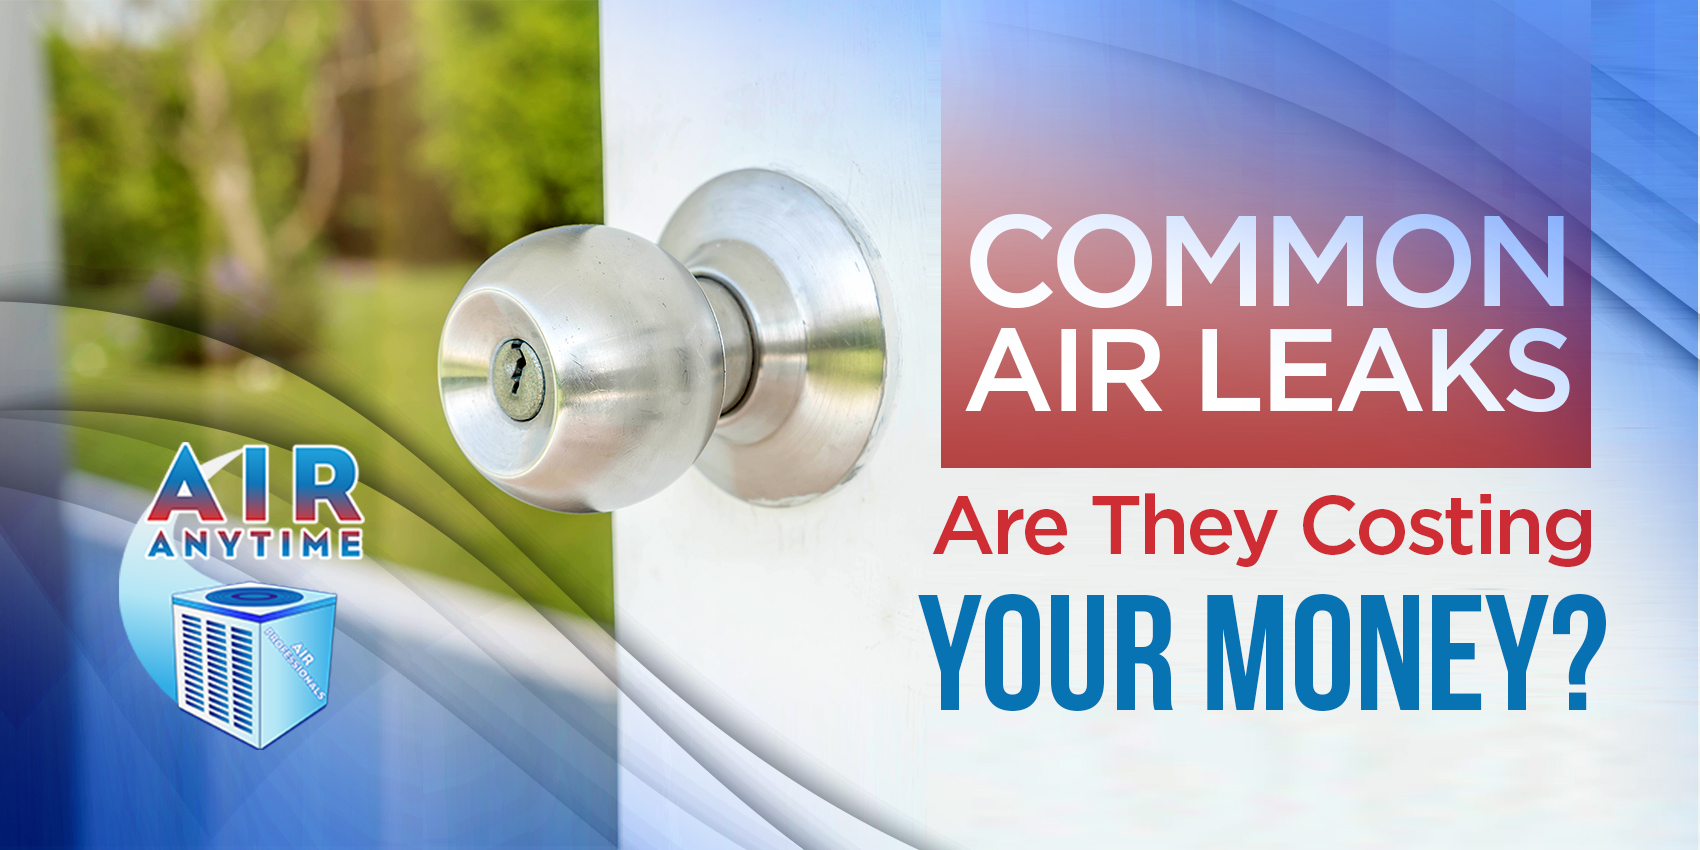 Common Air Leaks: Are They Costing Your Money?